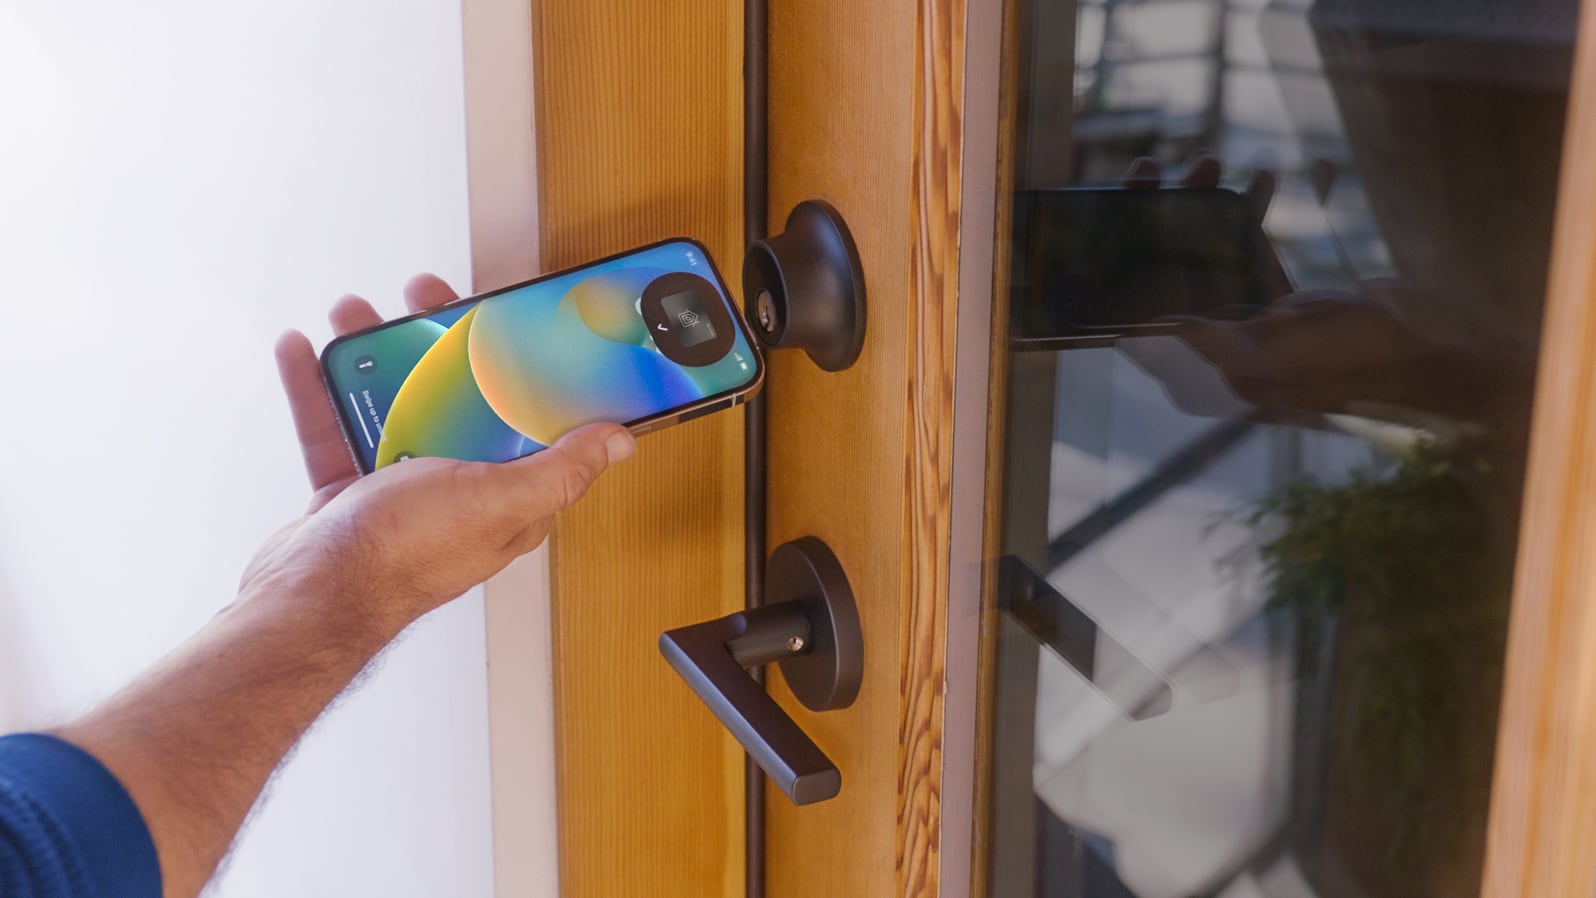 Review: The Level Lock+ Makes Unlocking Your Home Easy, But It Isn’t the Most Secure